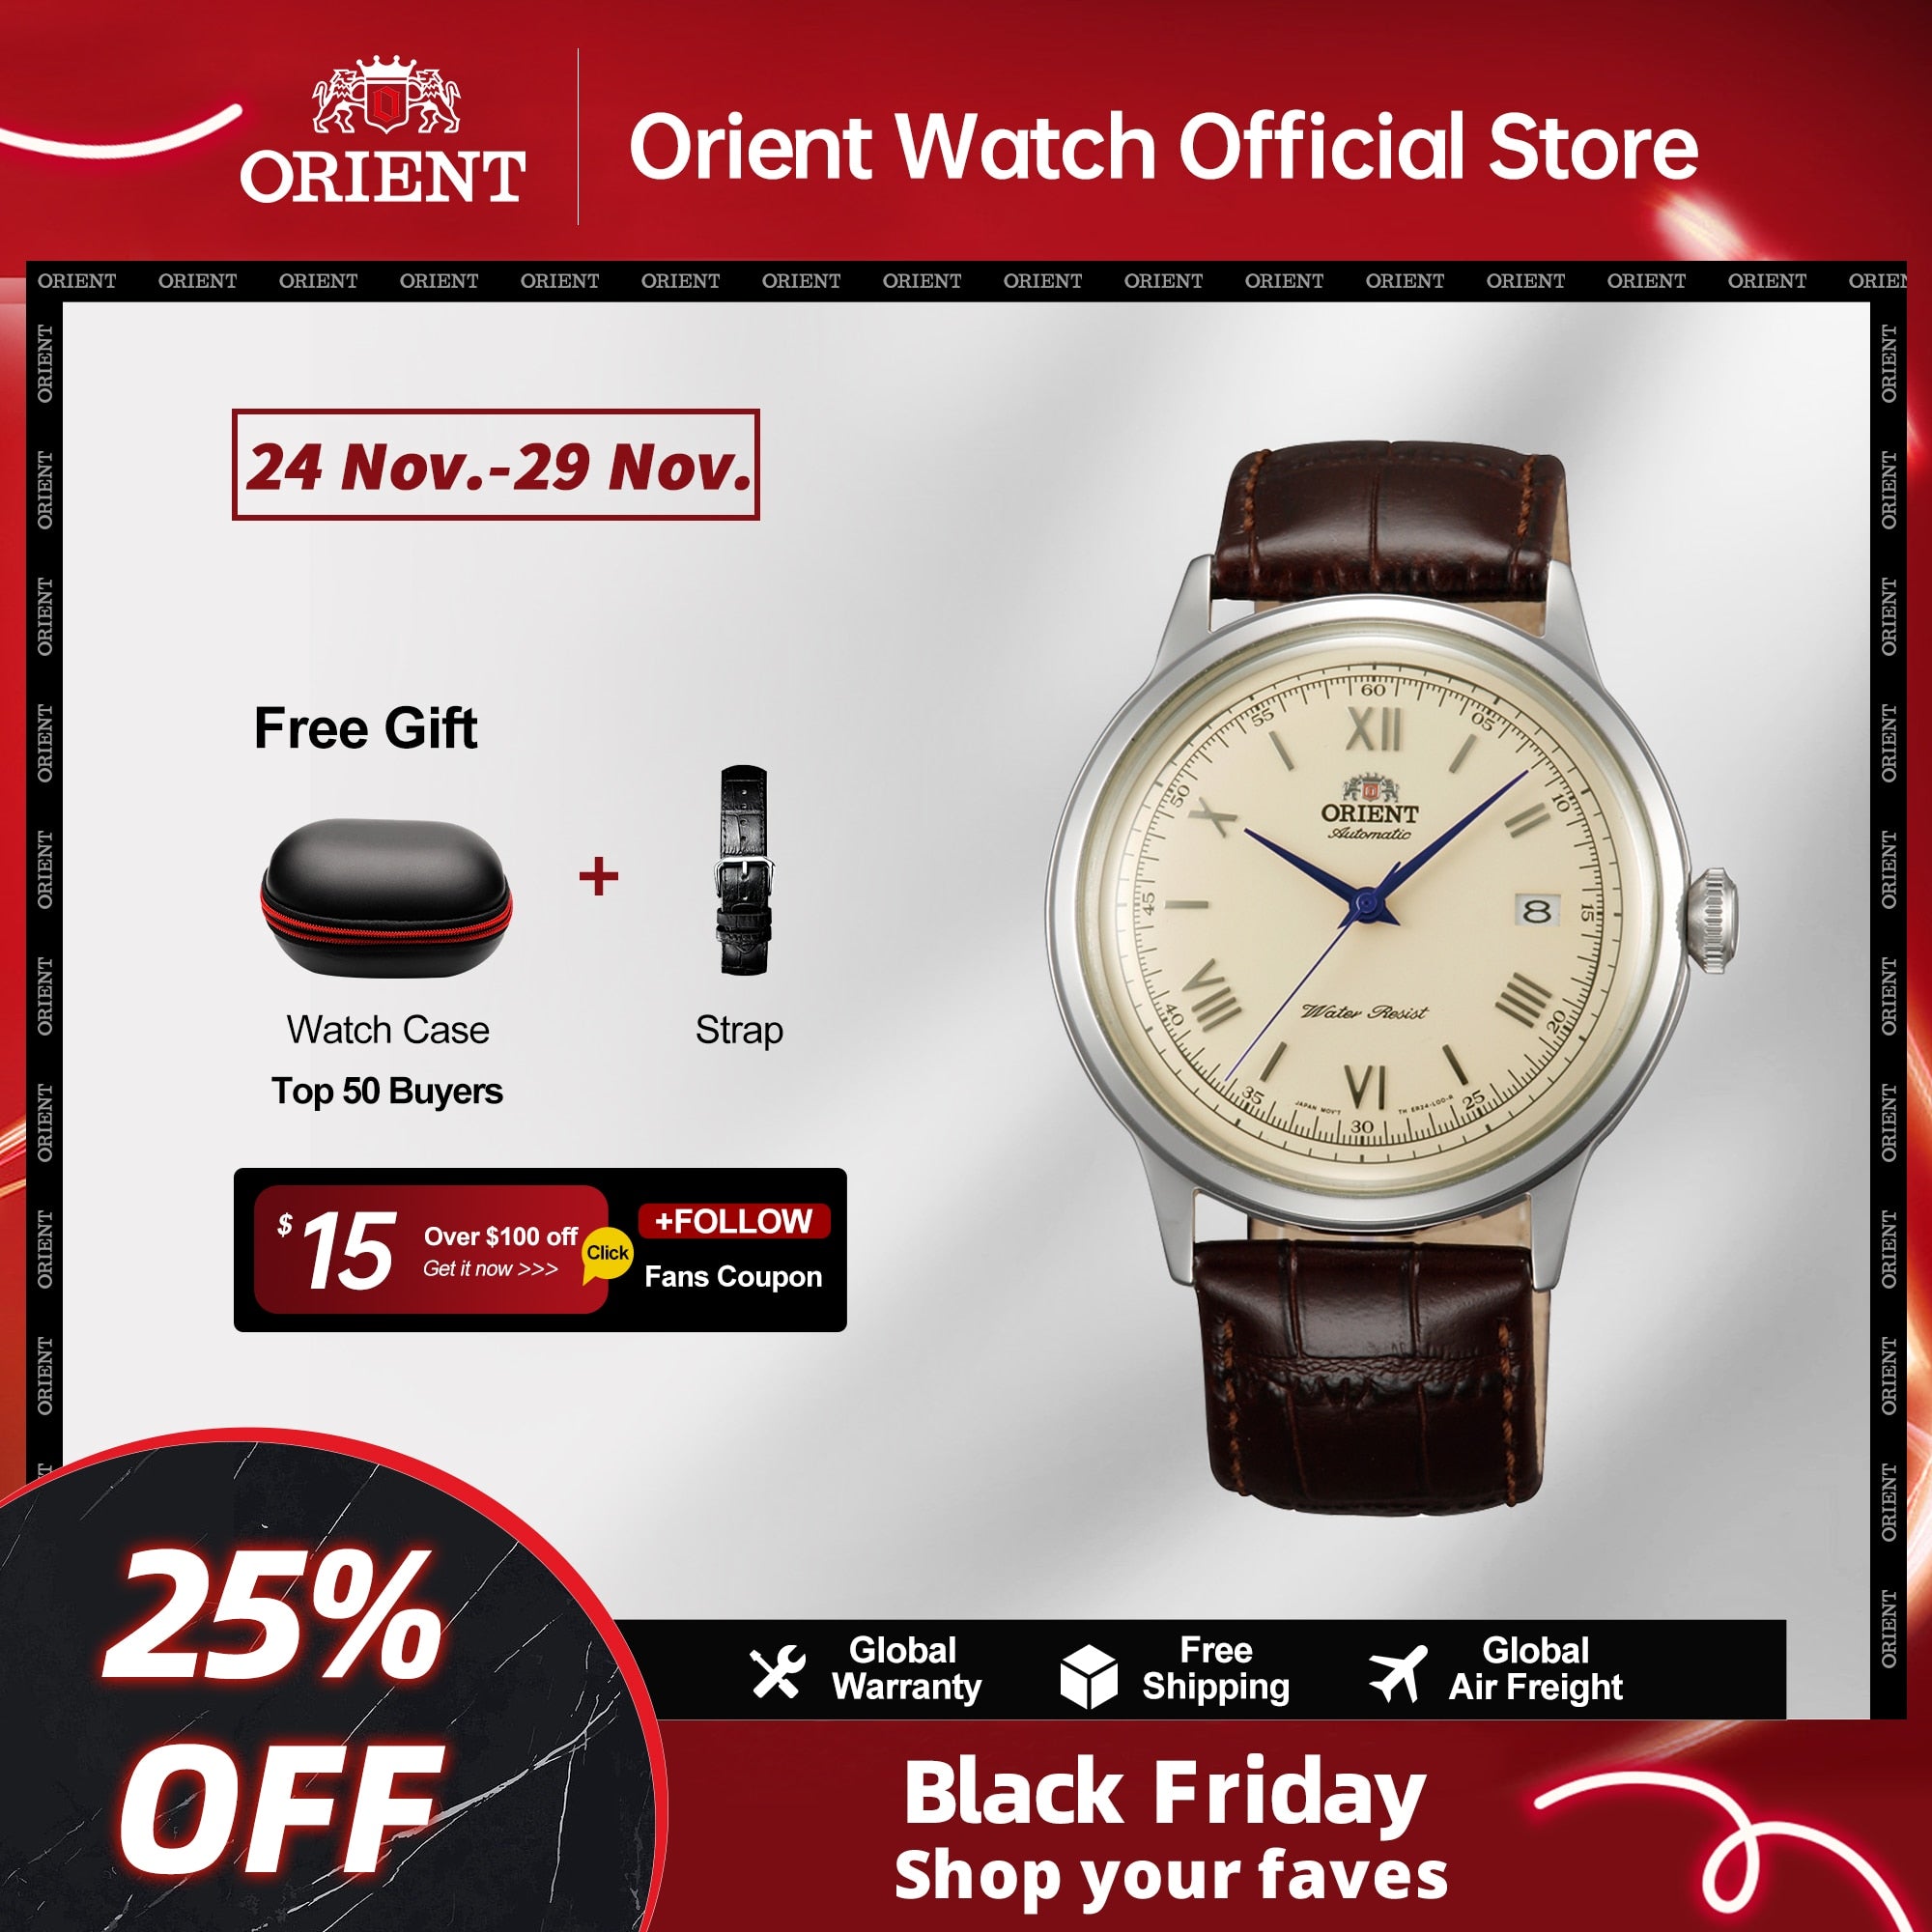 Original Orient MAN MECHAN WATCH, Automatic Man Watches Japanese Vintage WristWatch Gen.2 Bambino Domed Dial,His Hers Watch Sets